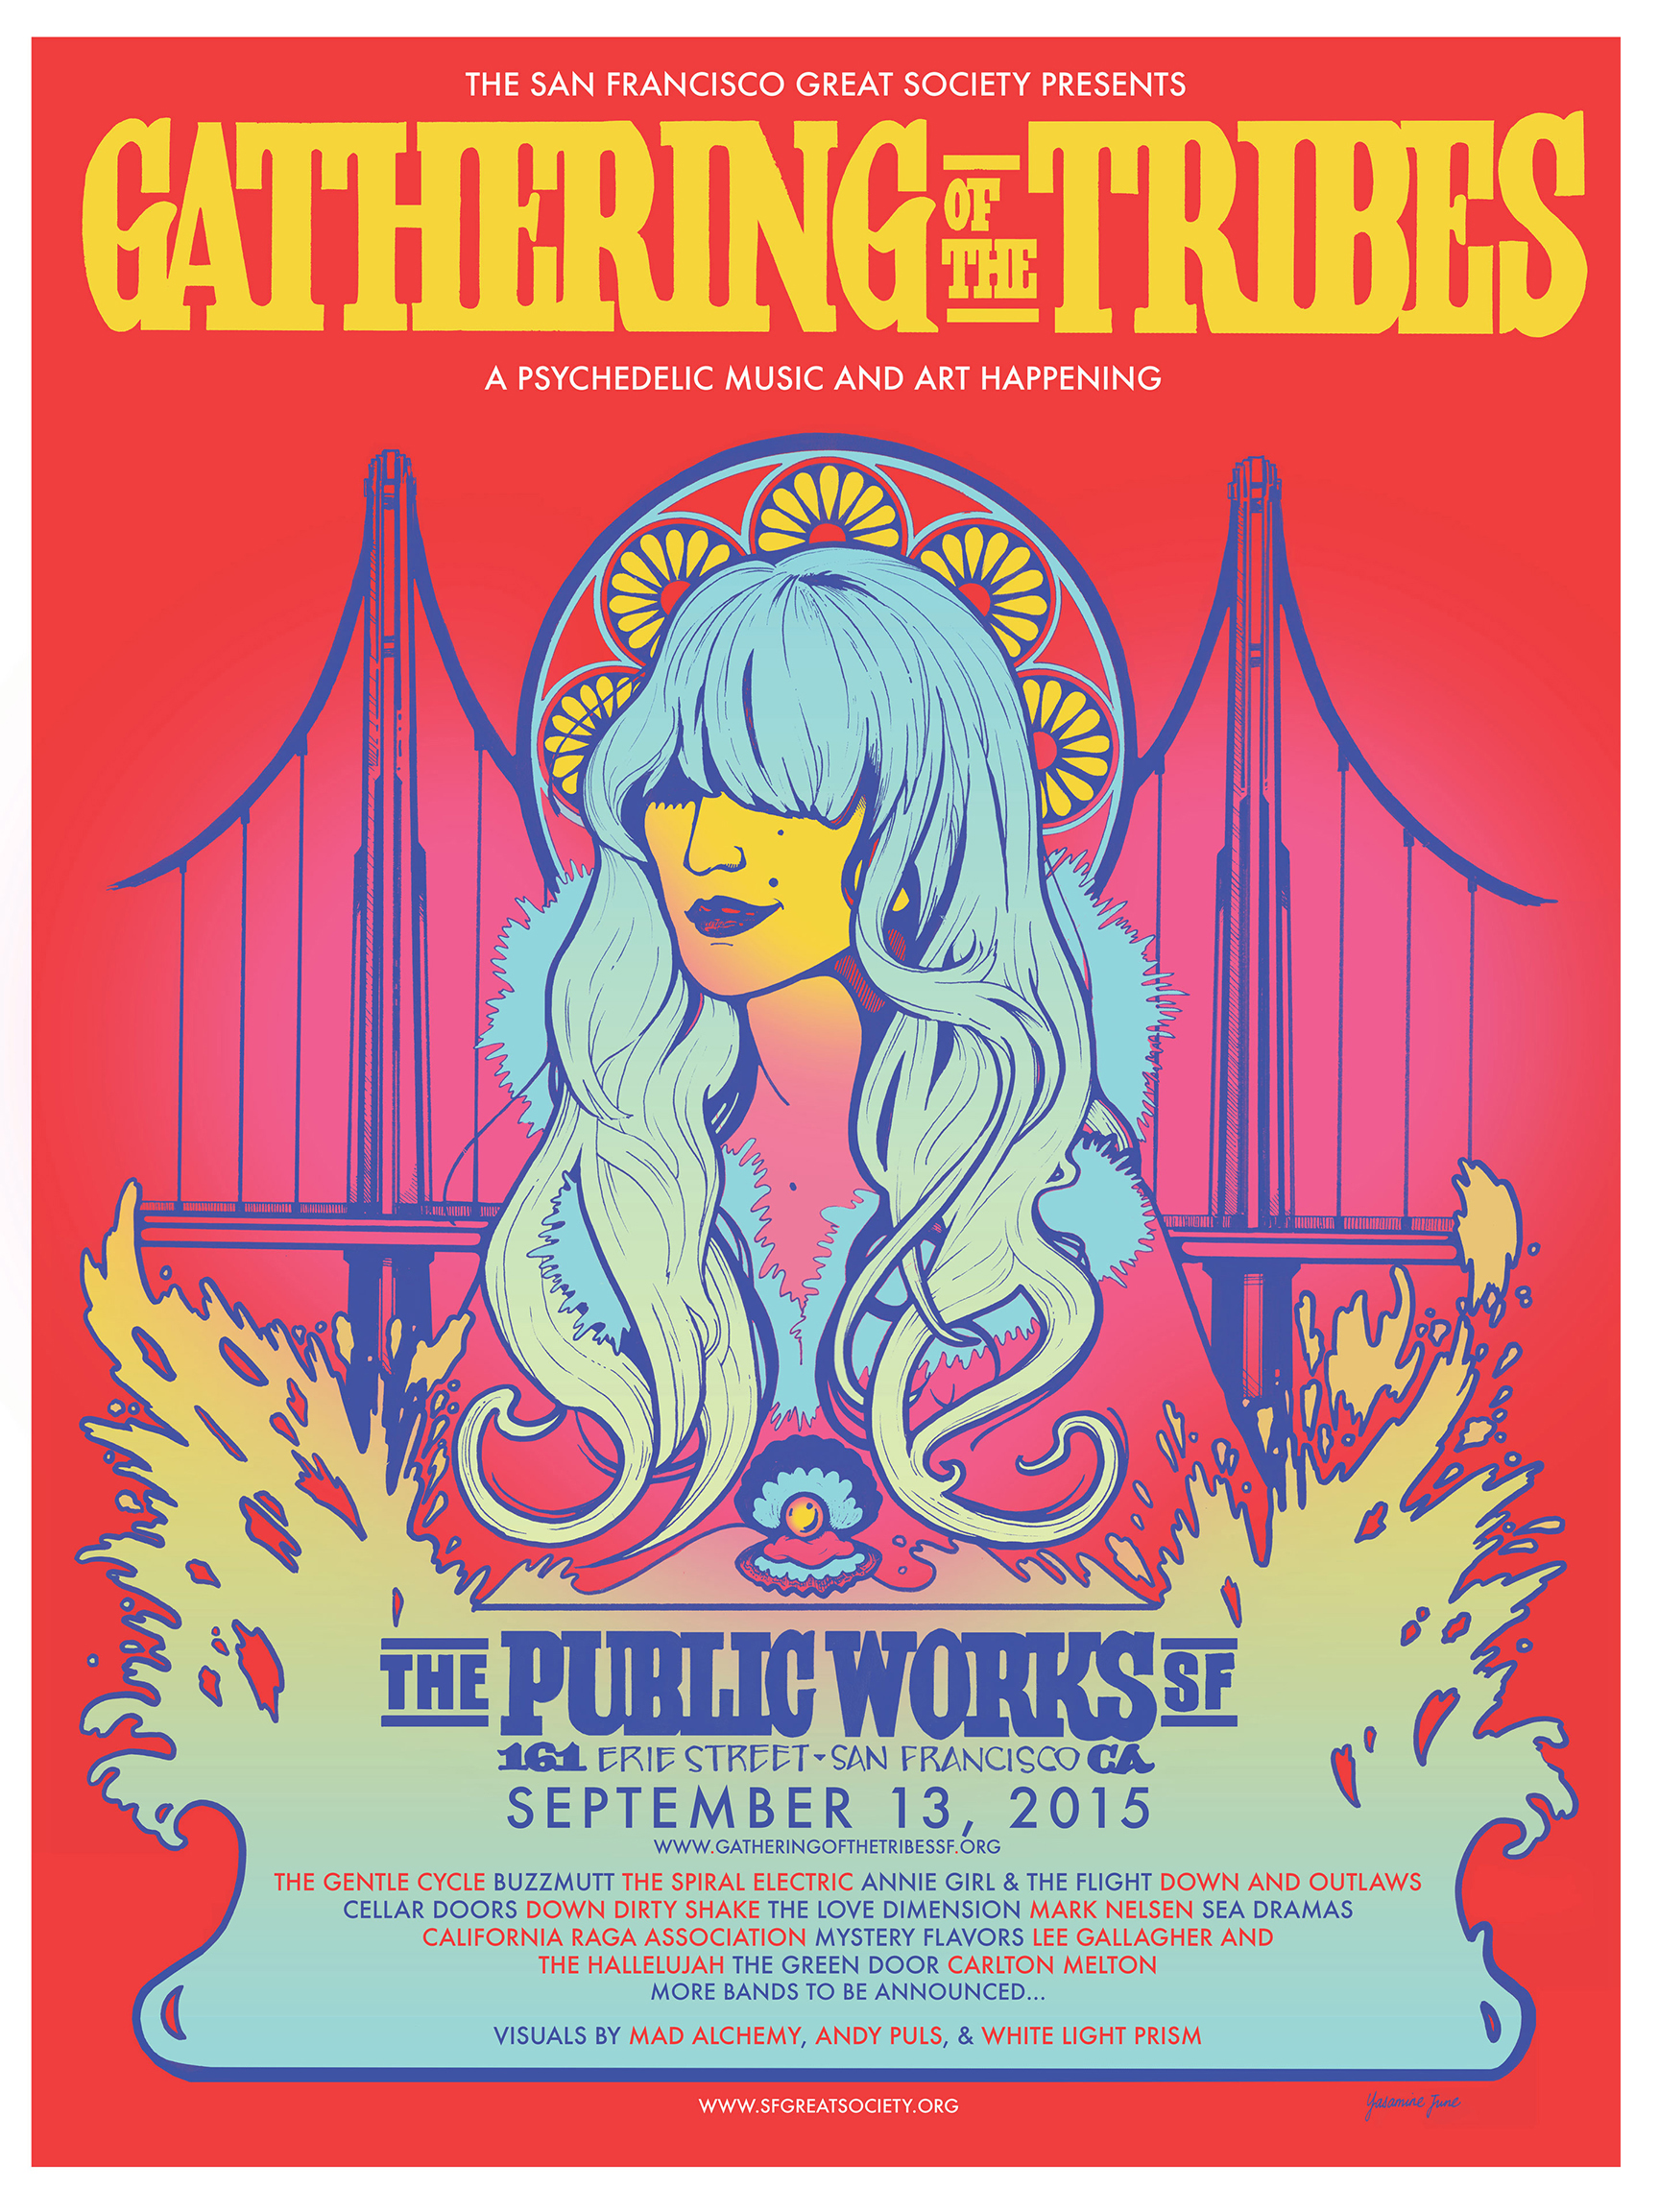   Festival Poster for Gathering of the Tribes 2015  